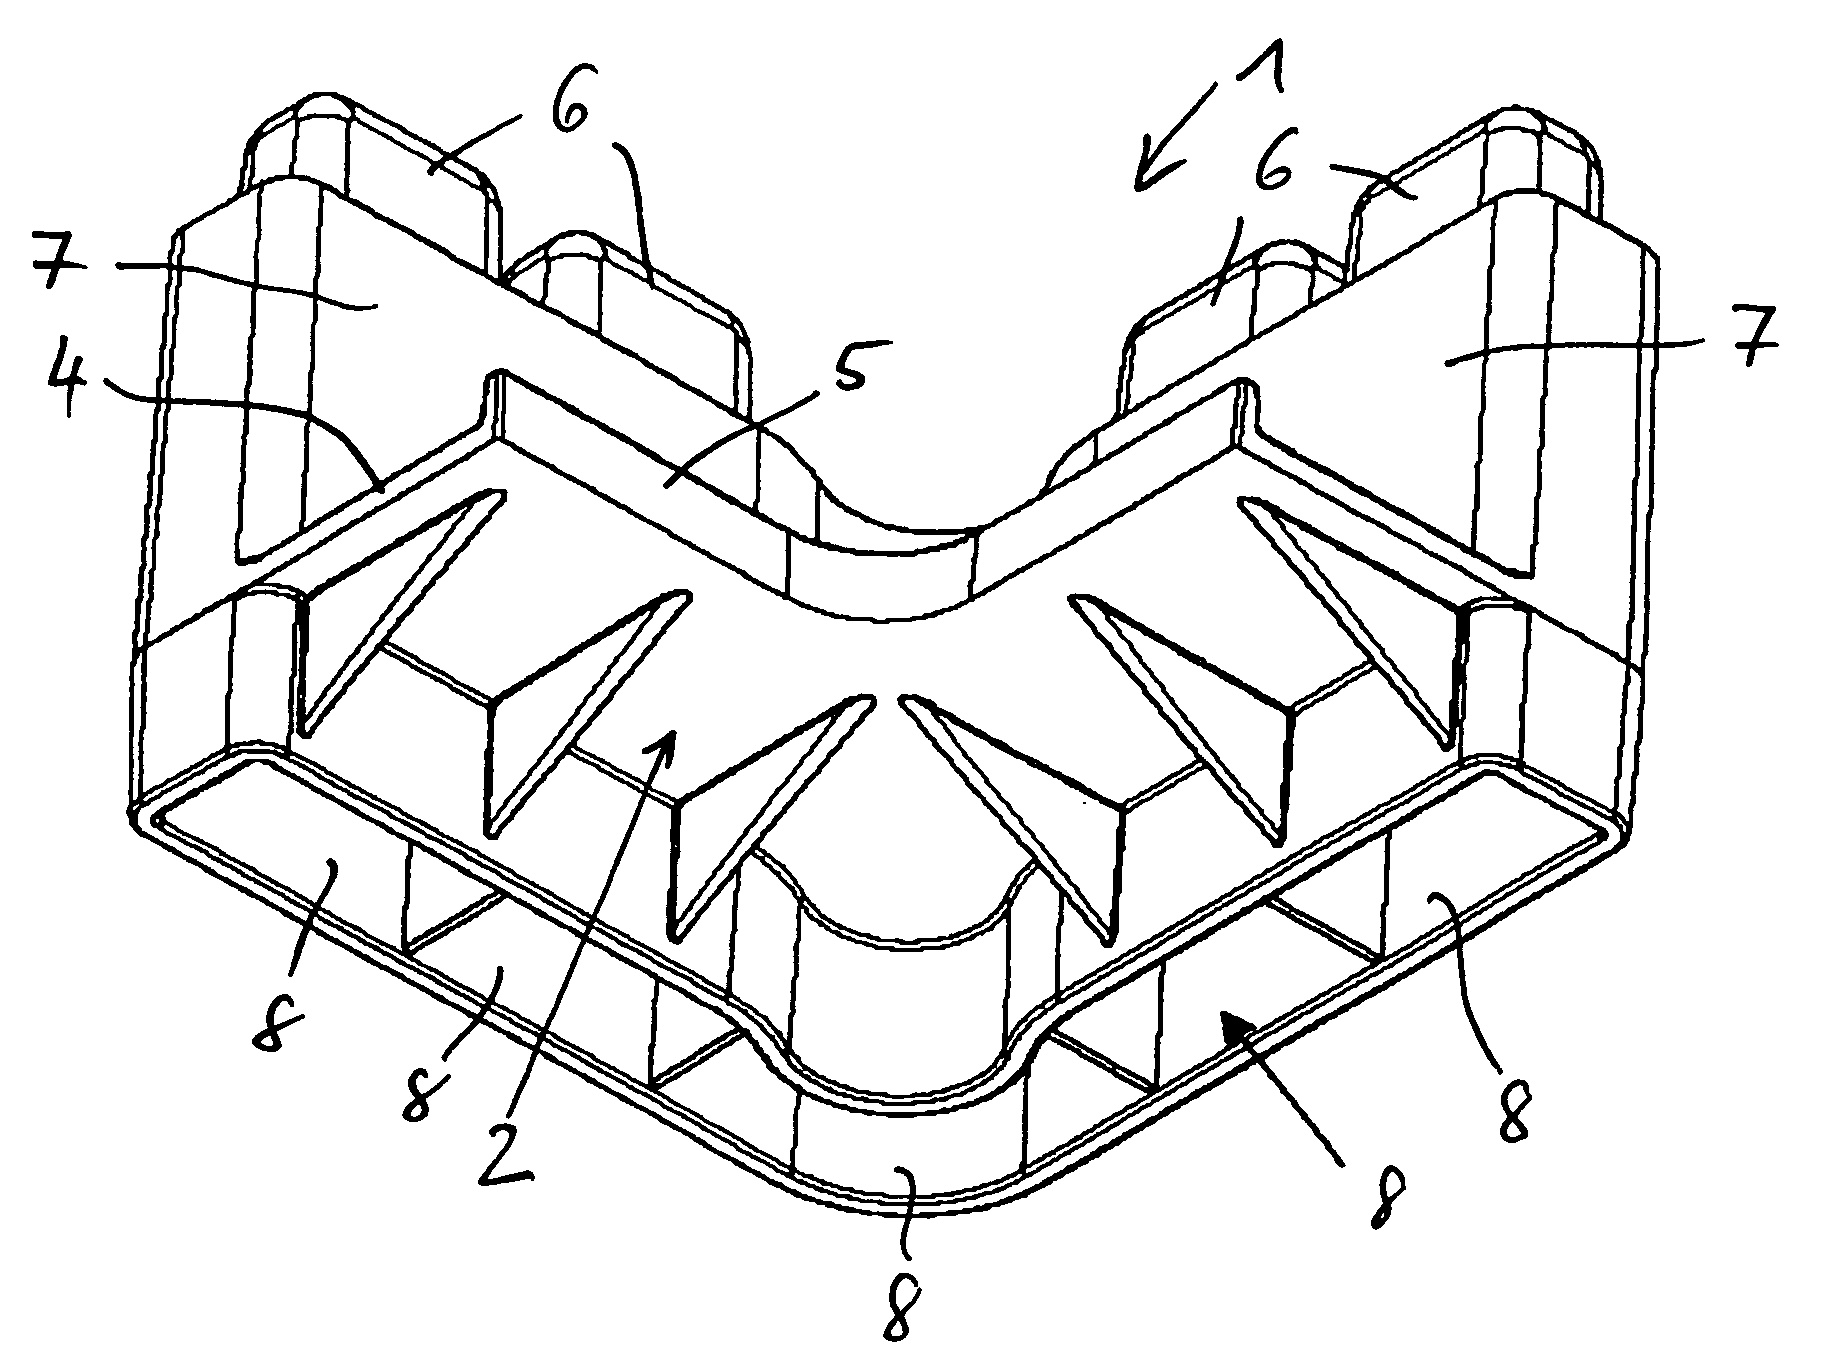 Modular plug-in apparatus and method for safe and secure storage of horizontally stacked photovoltaic modules during transport